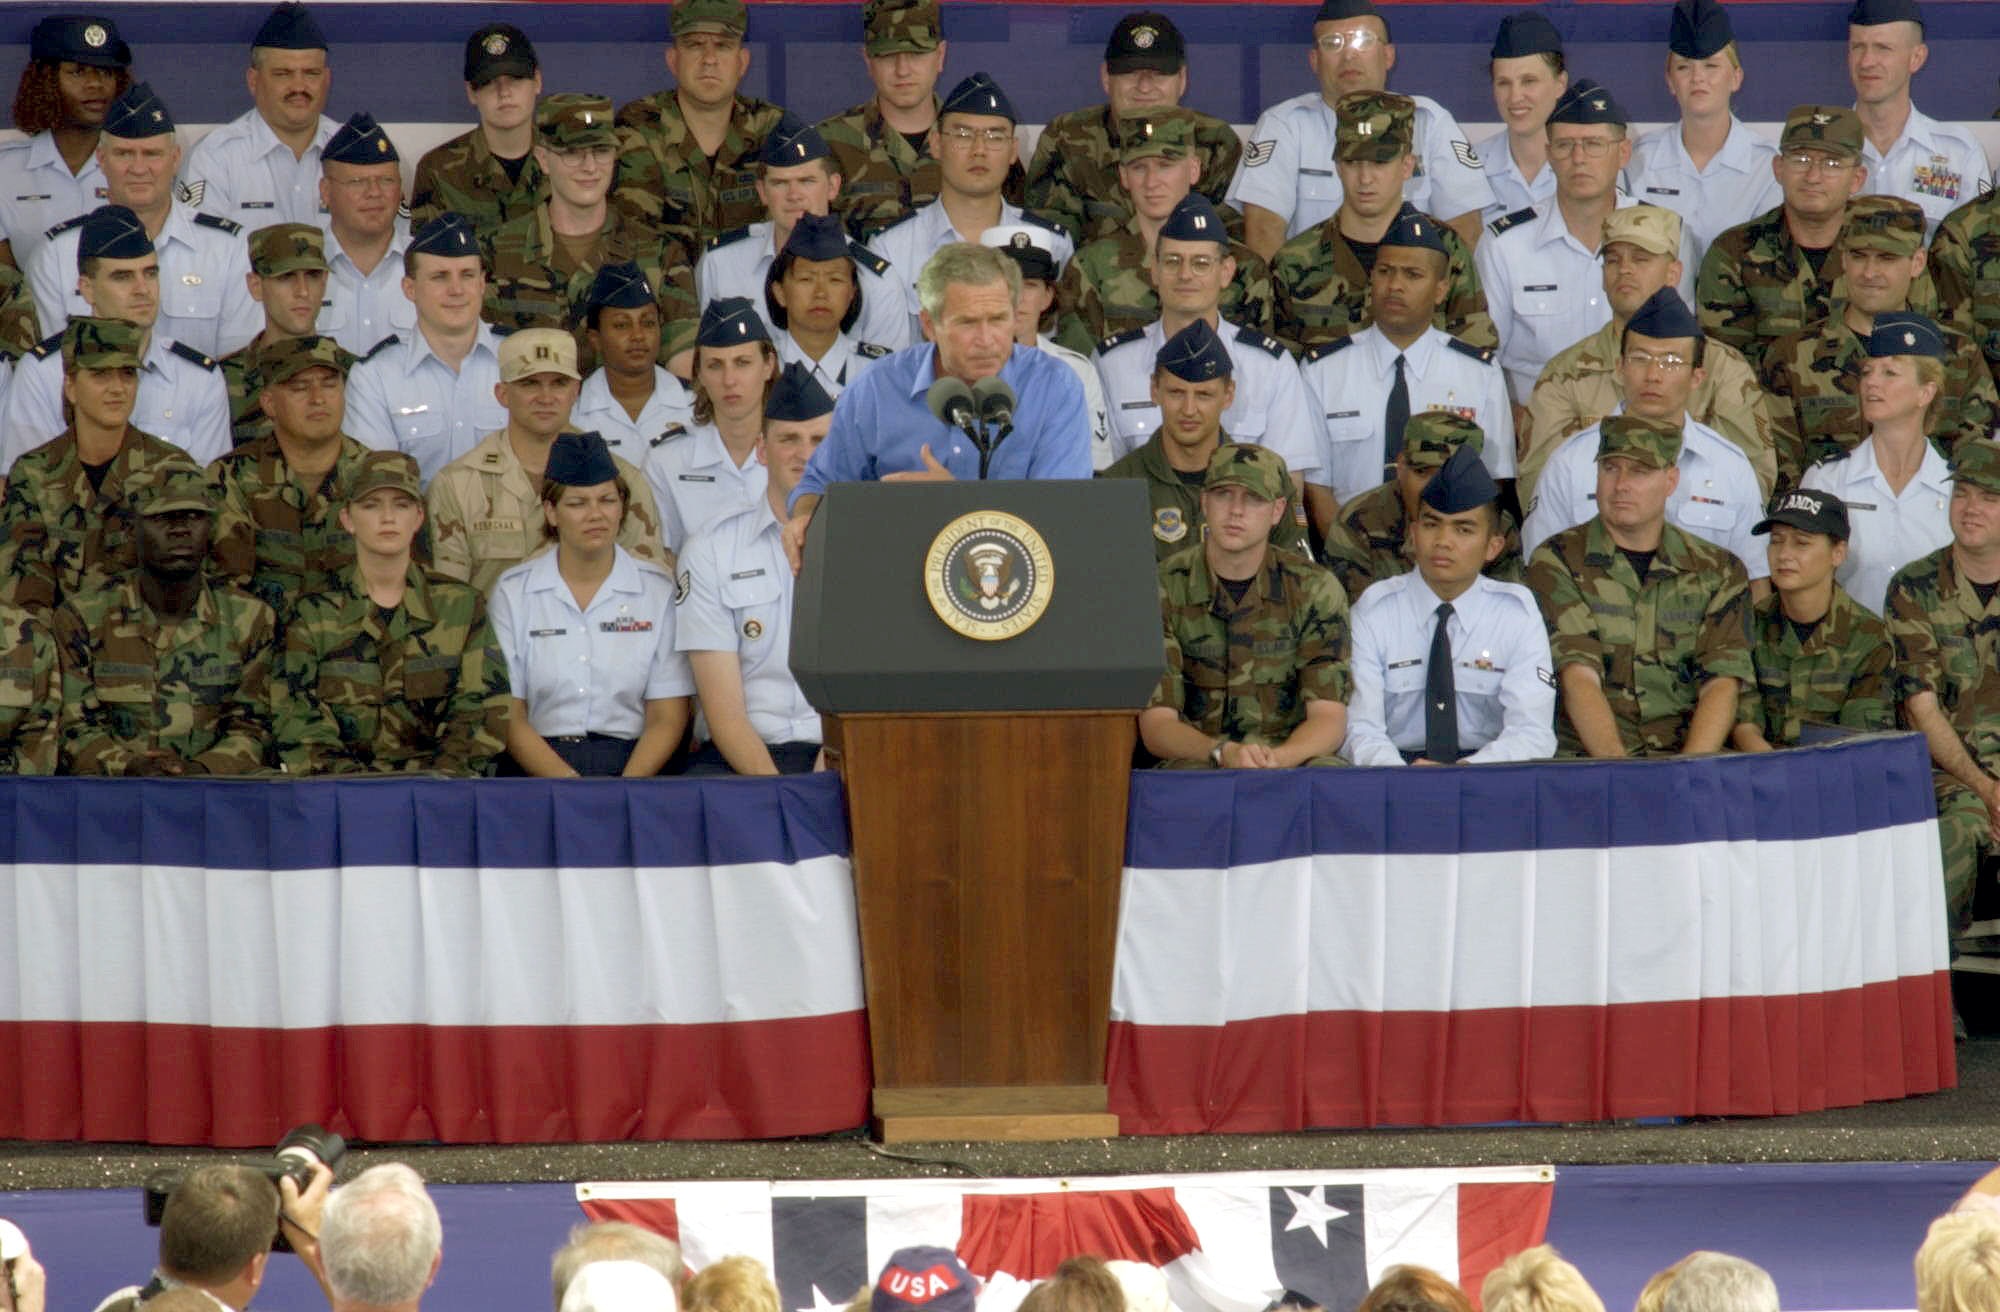 WRIGHT-PATTERSON AIR FORCE BASE, Ohio -- President George W. Bush addresses approximately 20,000 people here July 4.  During his address, Bush said "terrorists are on the run."  (U.S. Air Force photo by Capt. Danielle Burrows)